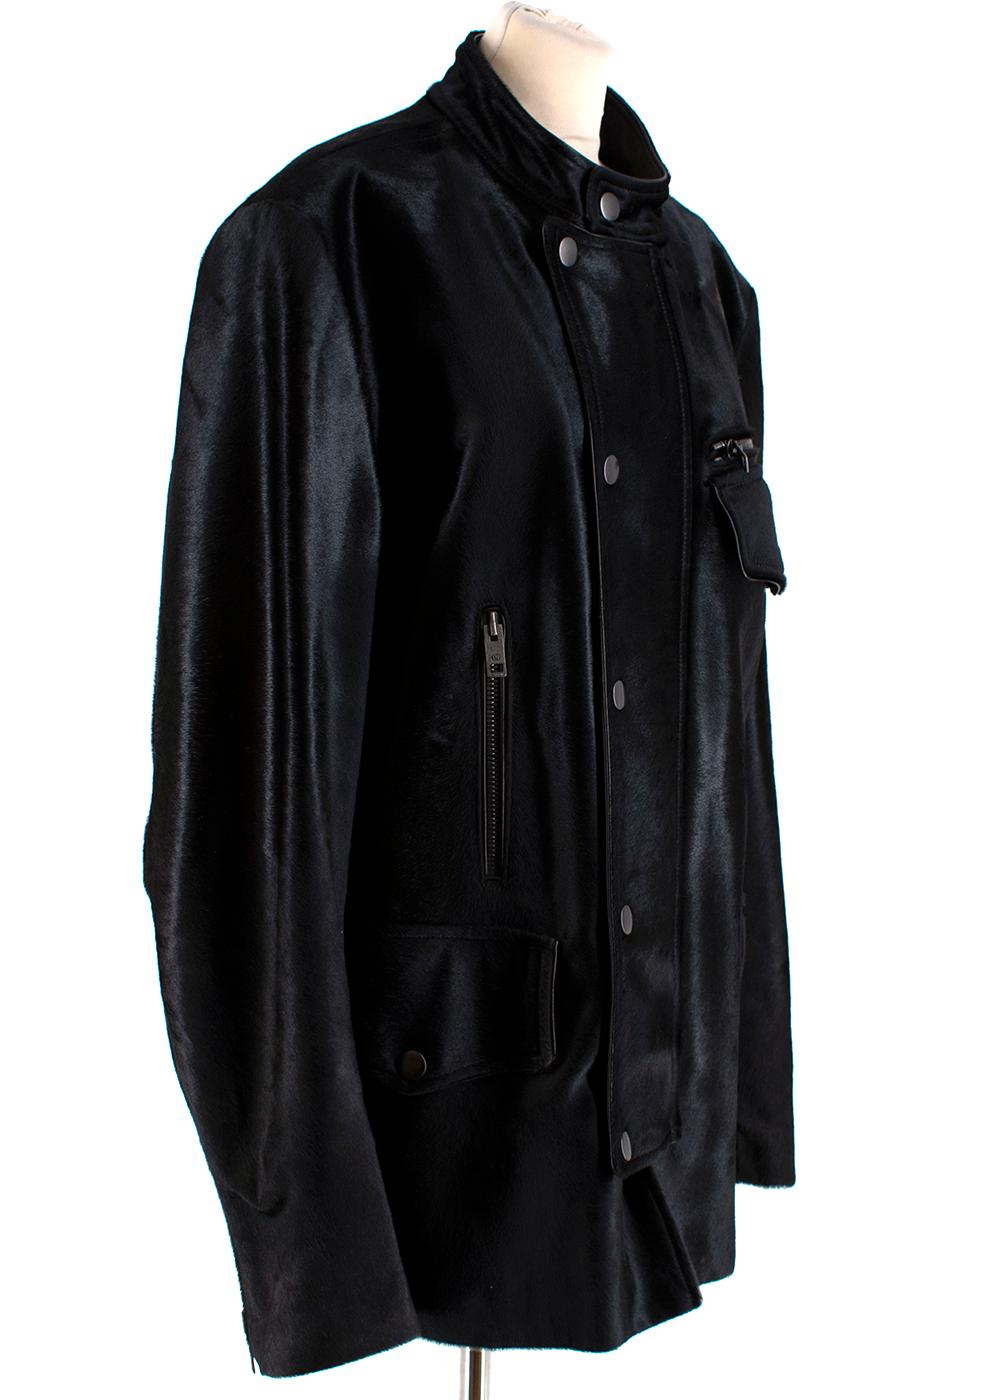 Gucci Black Leather and Pony Hair Coat

Motorcycle style jacket
Fully lined with cotton and cupro
Interior and Exterior Pockets
Zip and clasped 
Dry Clean Only
Made in Italy

Measurements are taken laying flat, seam to seam. 
50cm shoulders
52cm